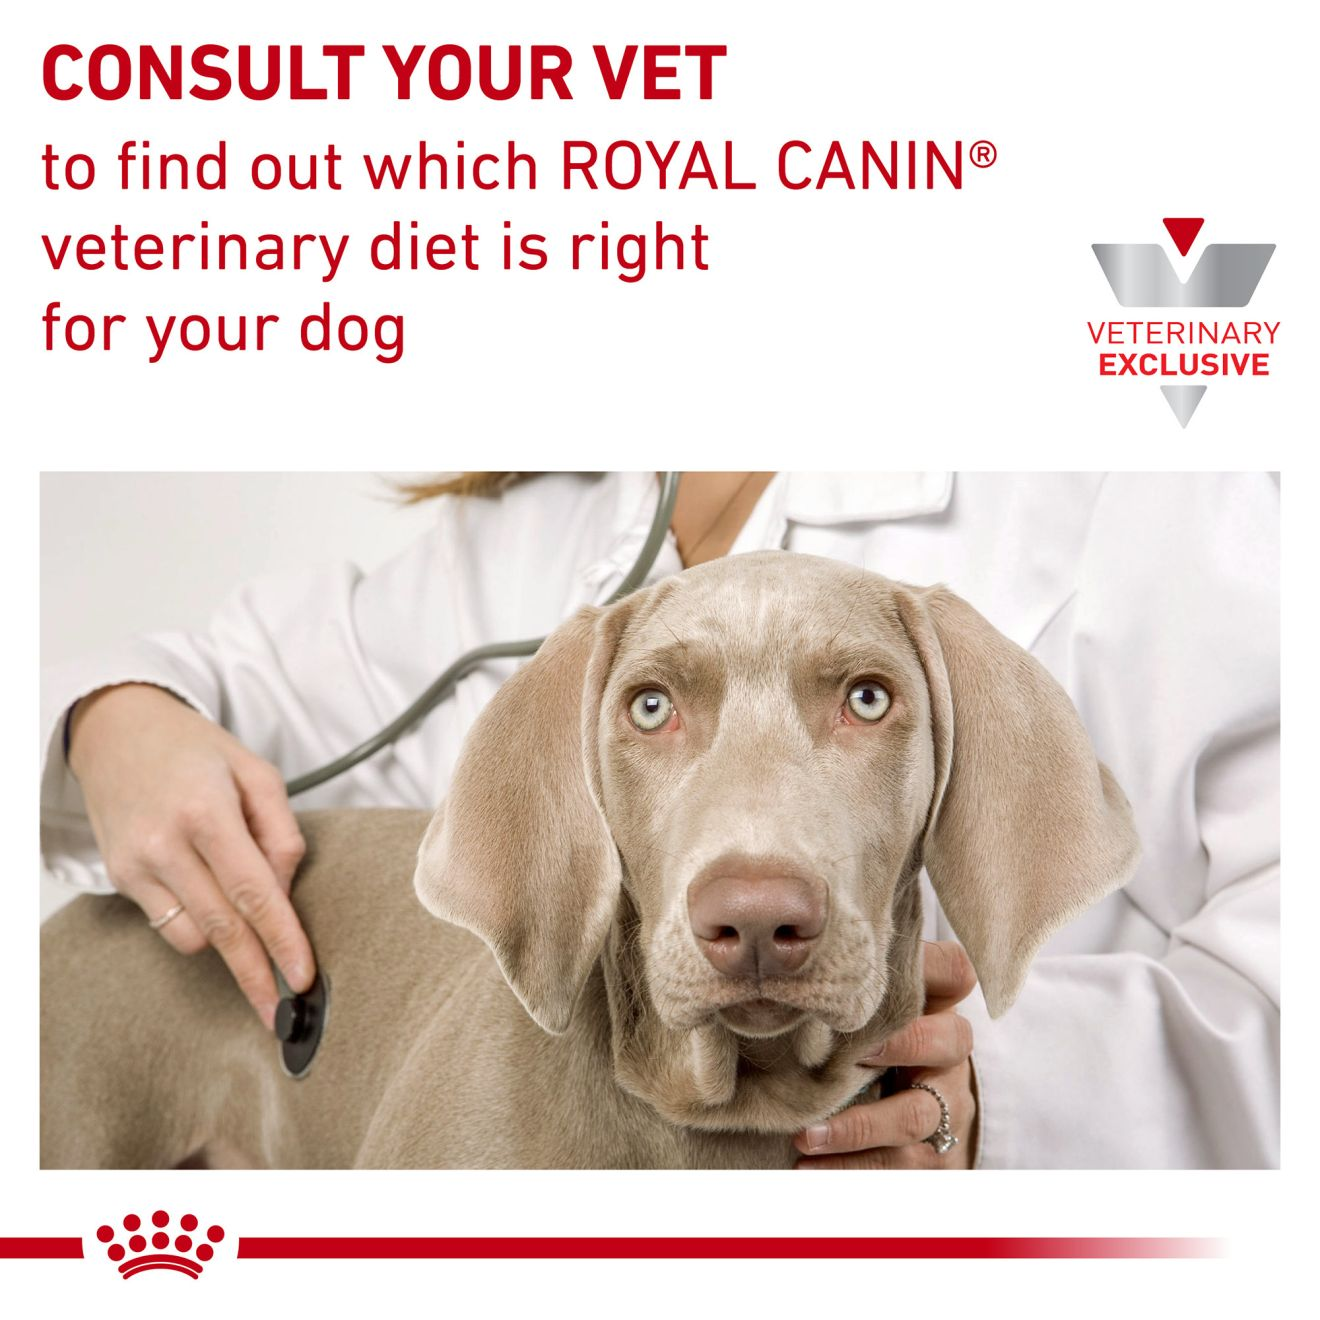 Canine Gastrointestinal Low Fat